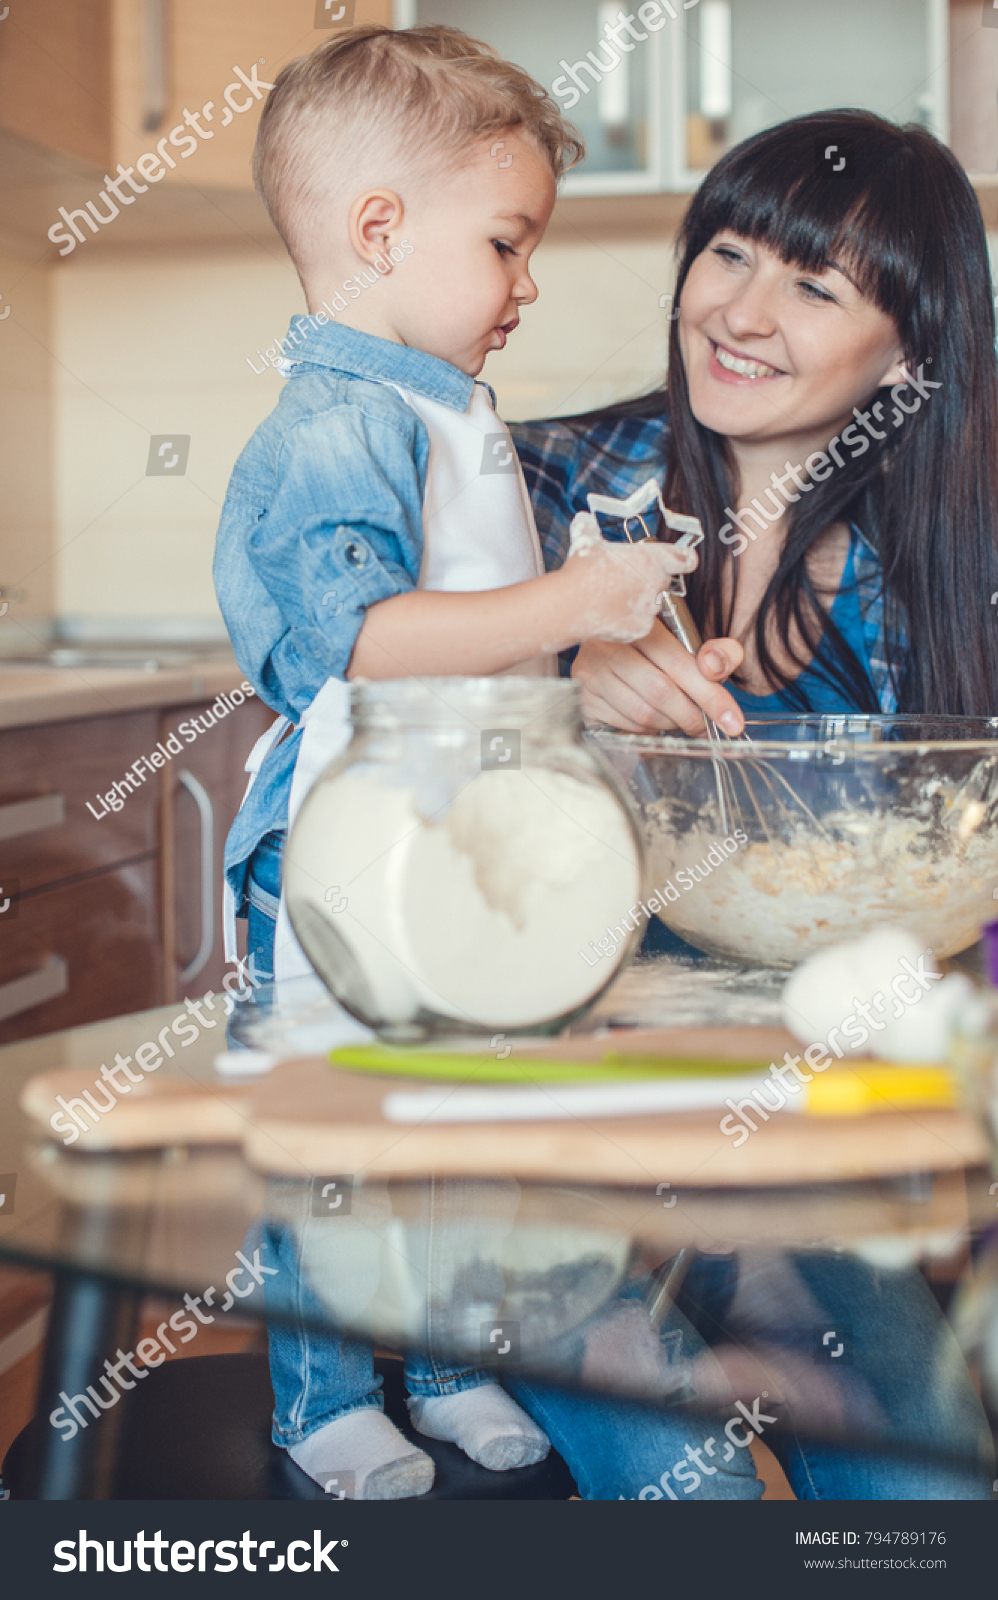 mother whisking dough and son holding dough mold #794789176